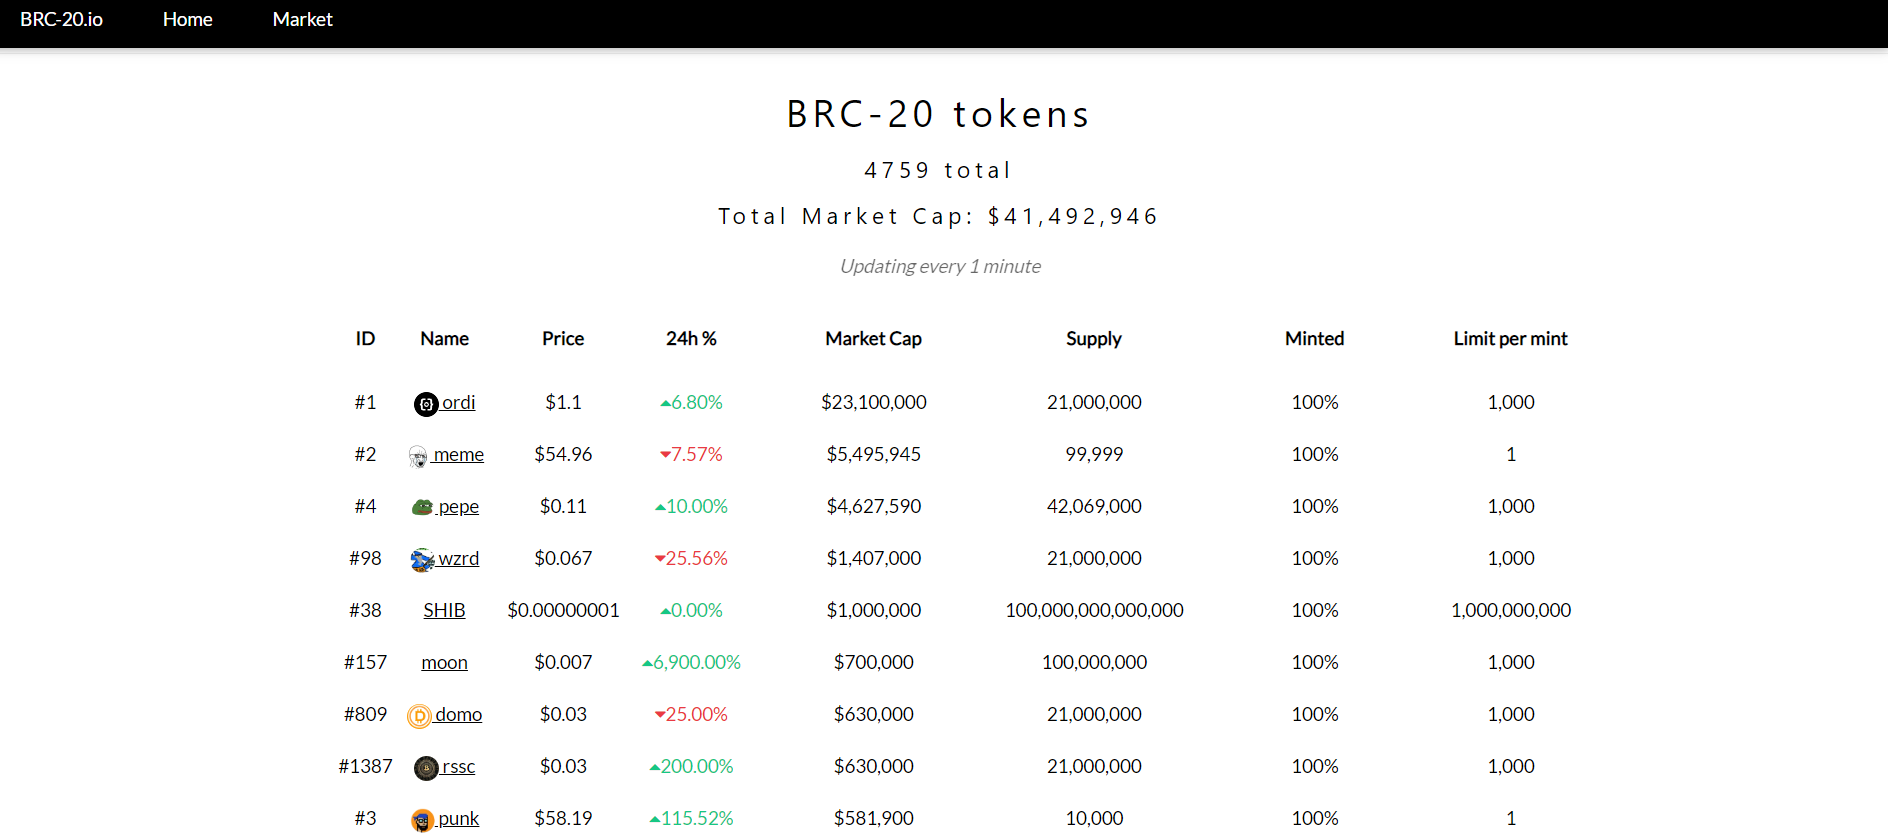 Real-time data can be queried at https://brc-20.io/.